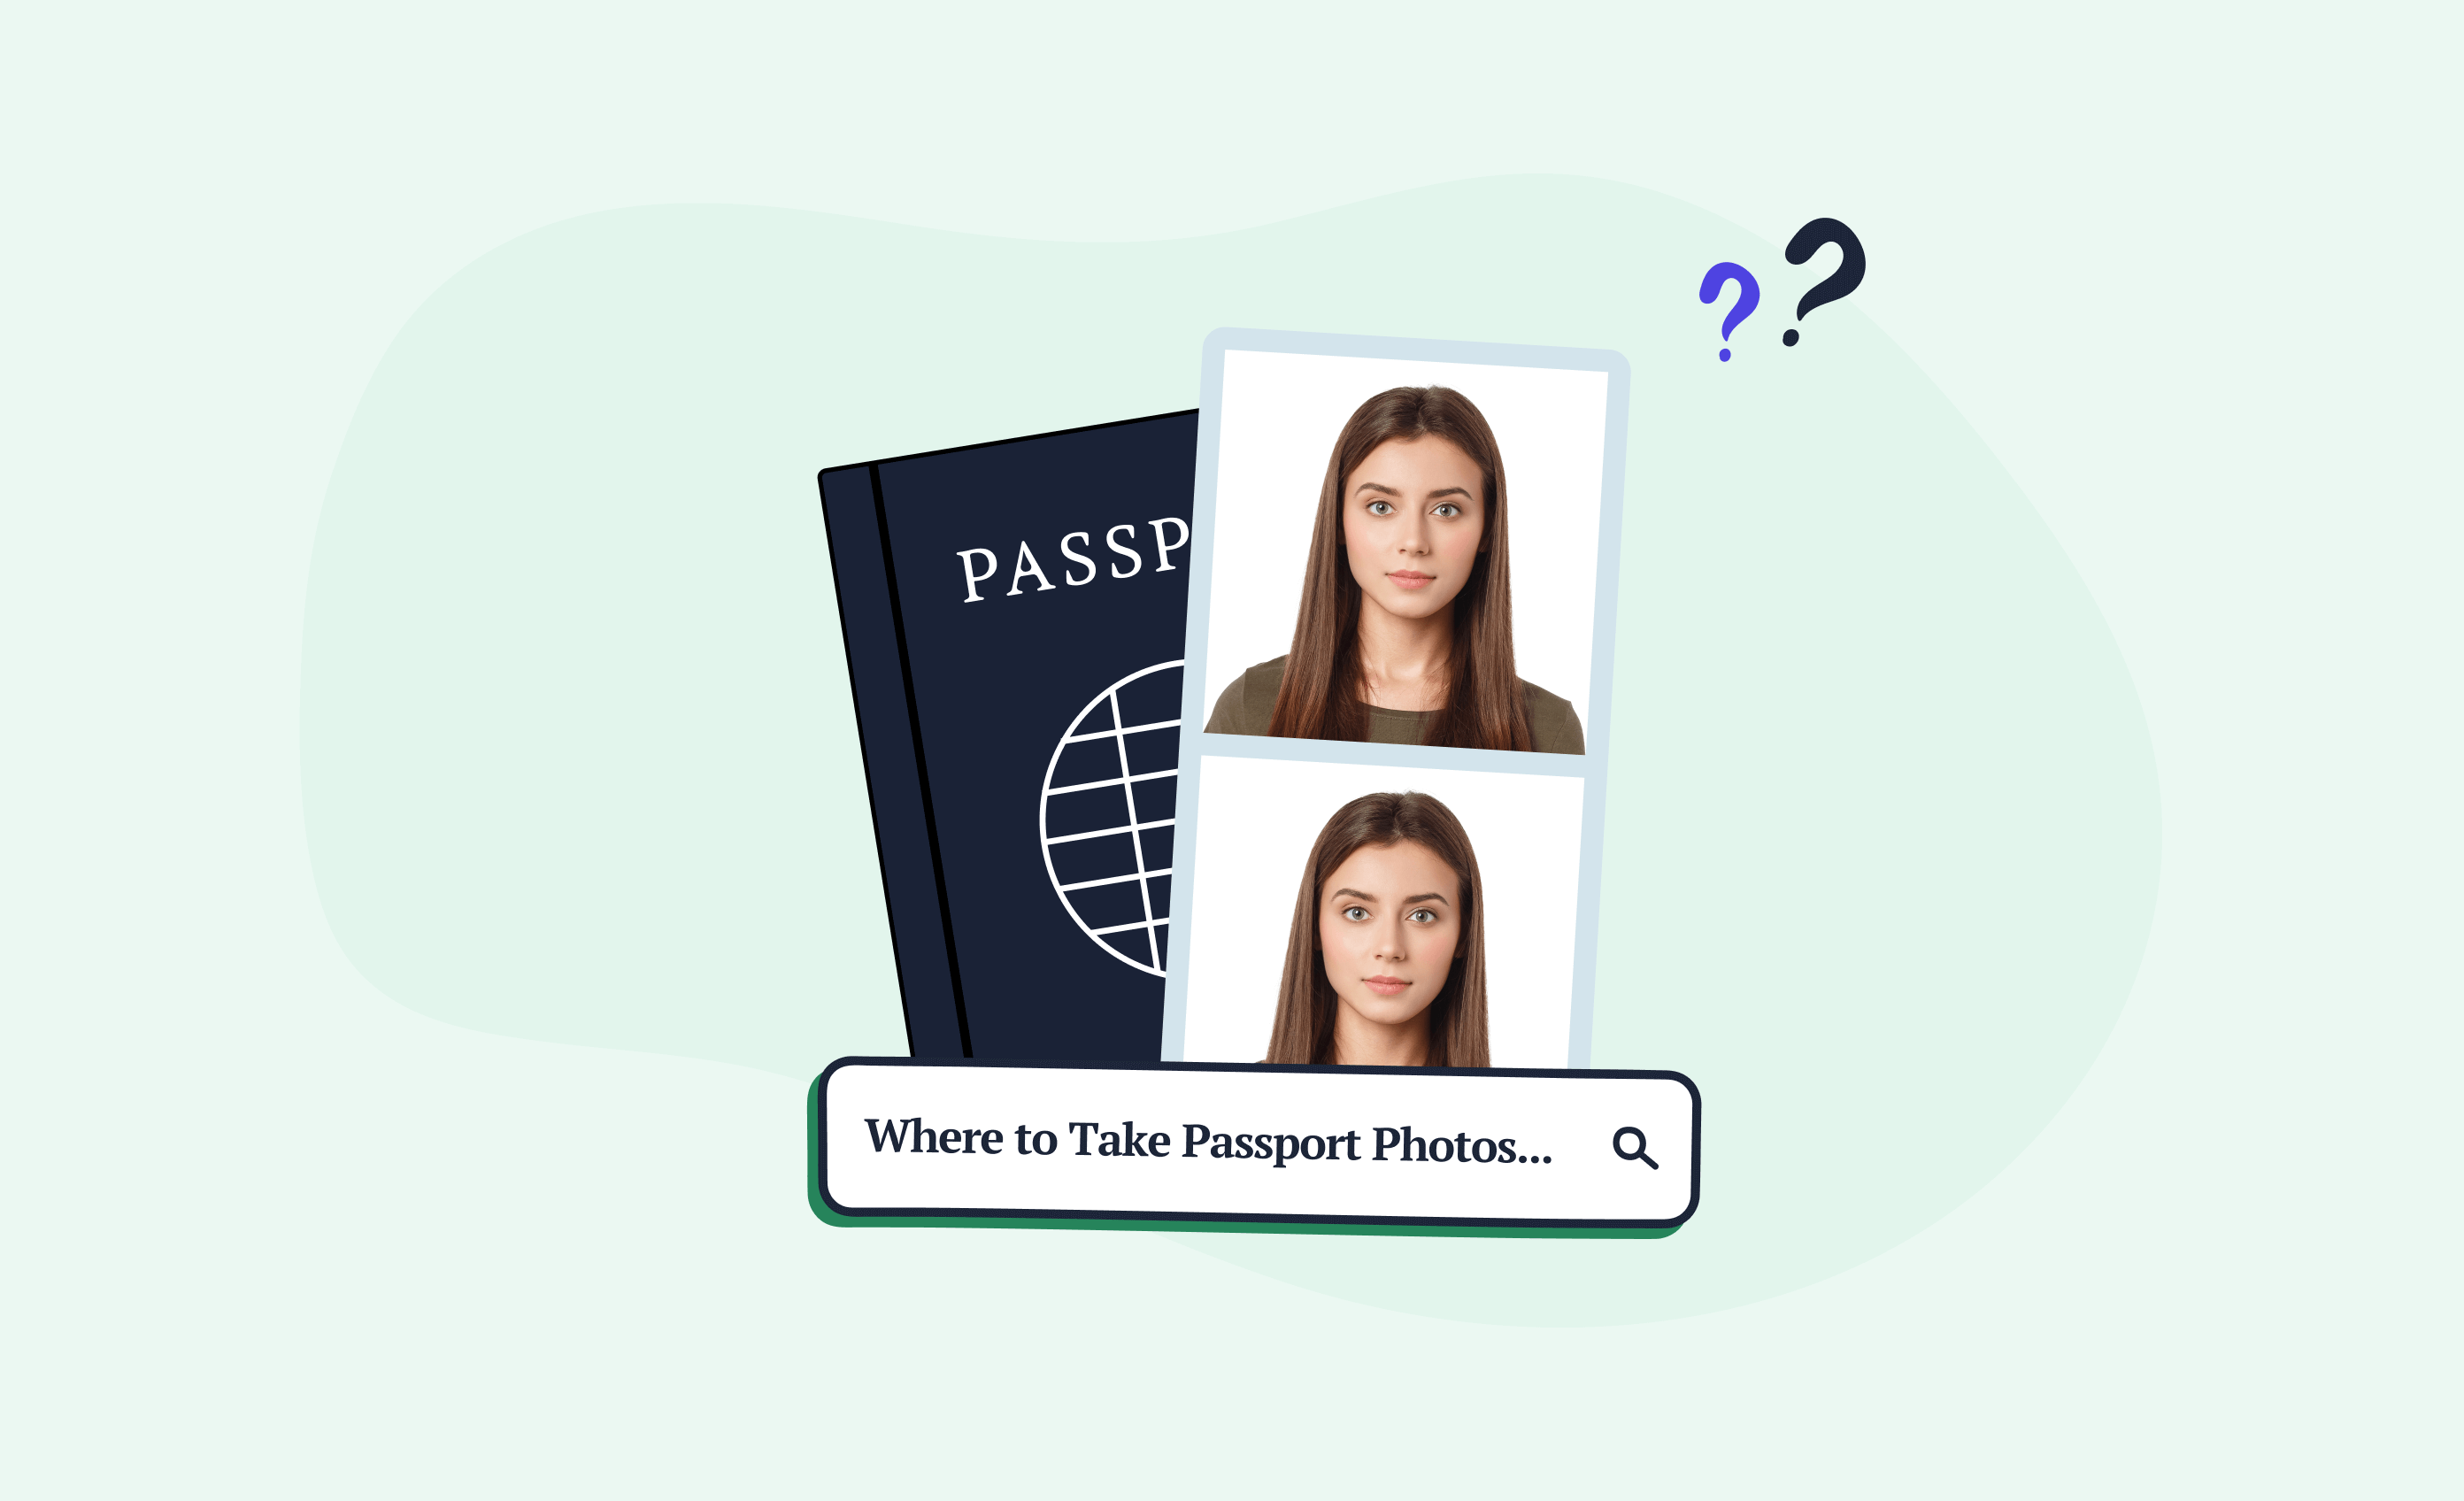 A clipart-style depiction of a US passport with two 2x2” passport photos next to it.